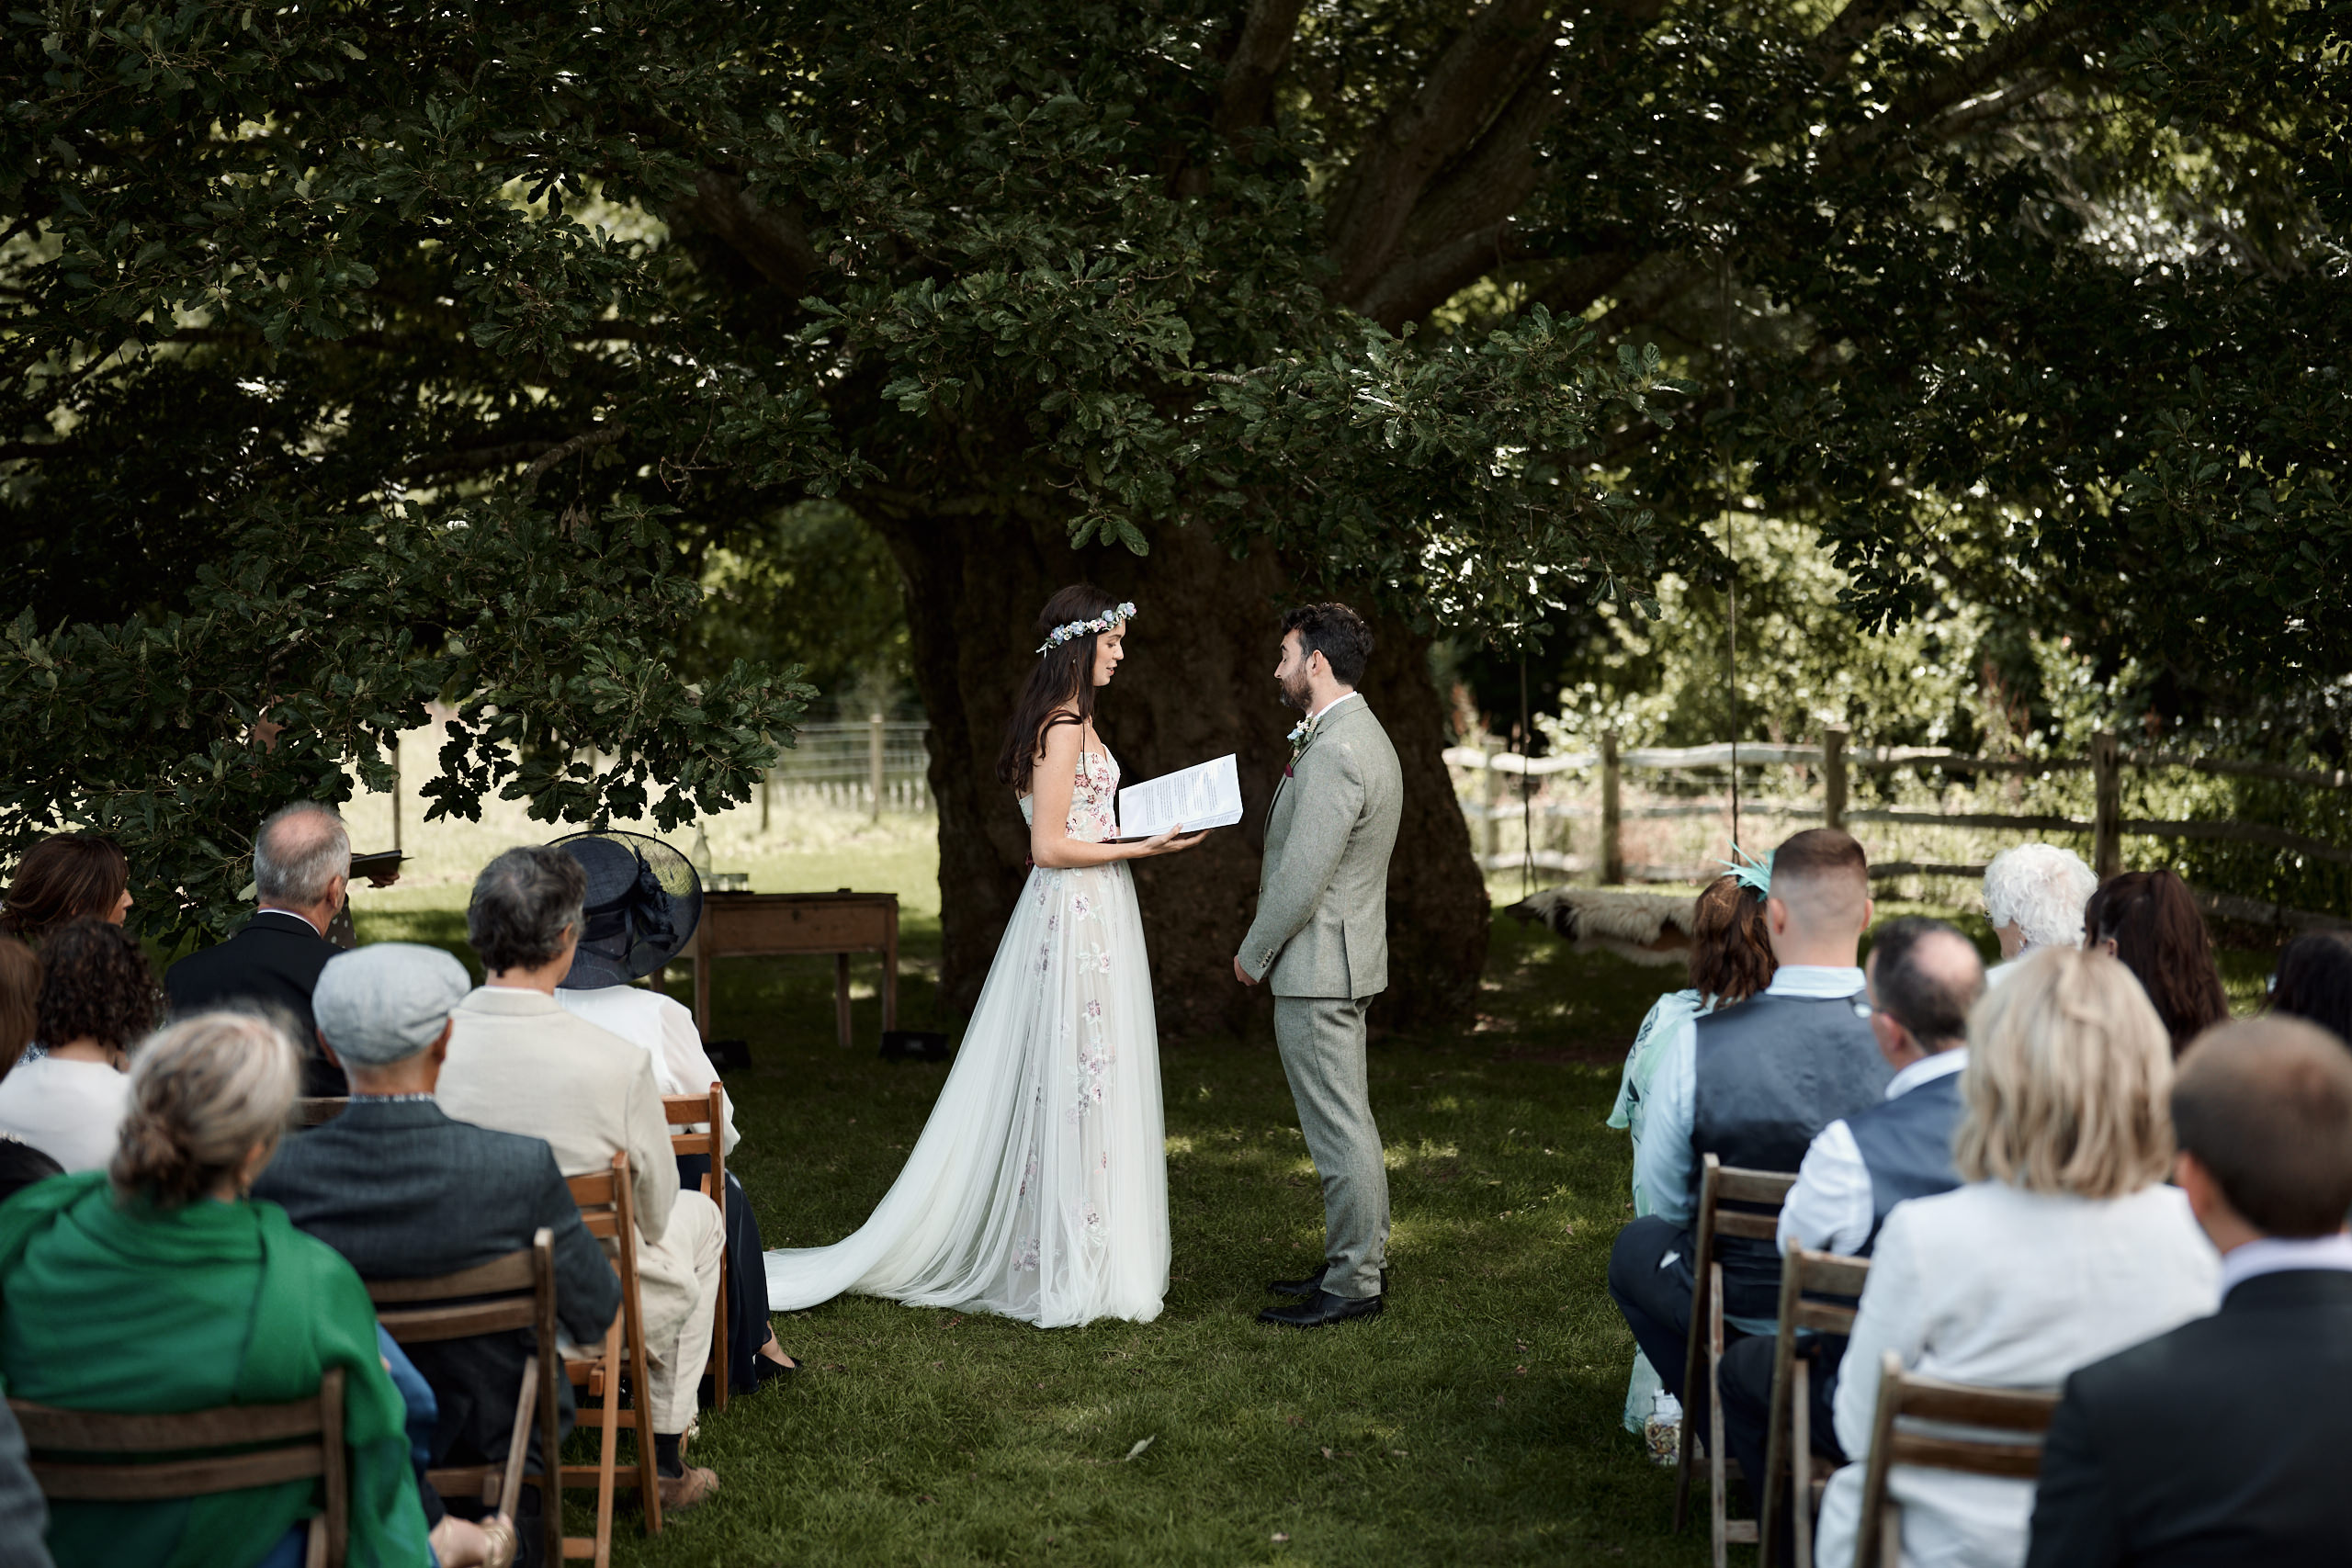 A couple getting married share promises by a tree.